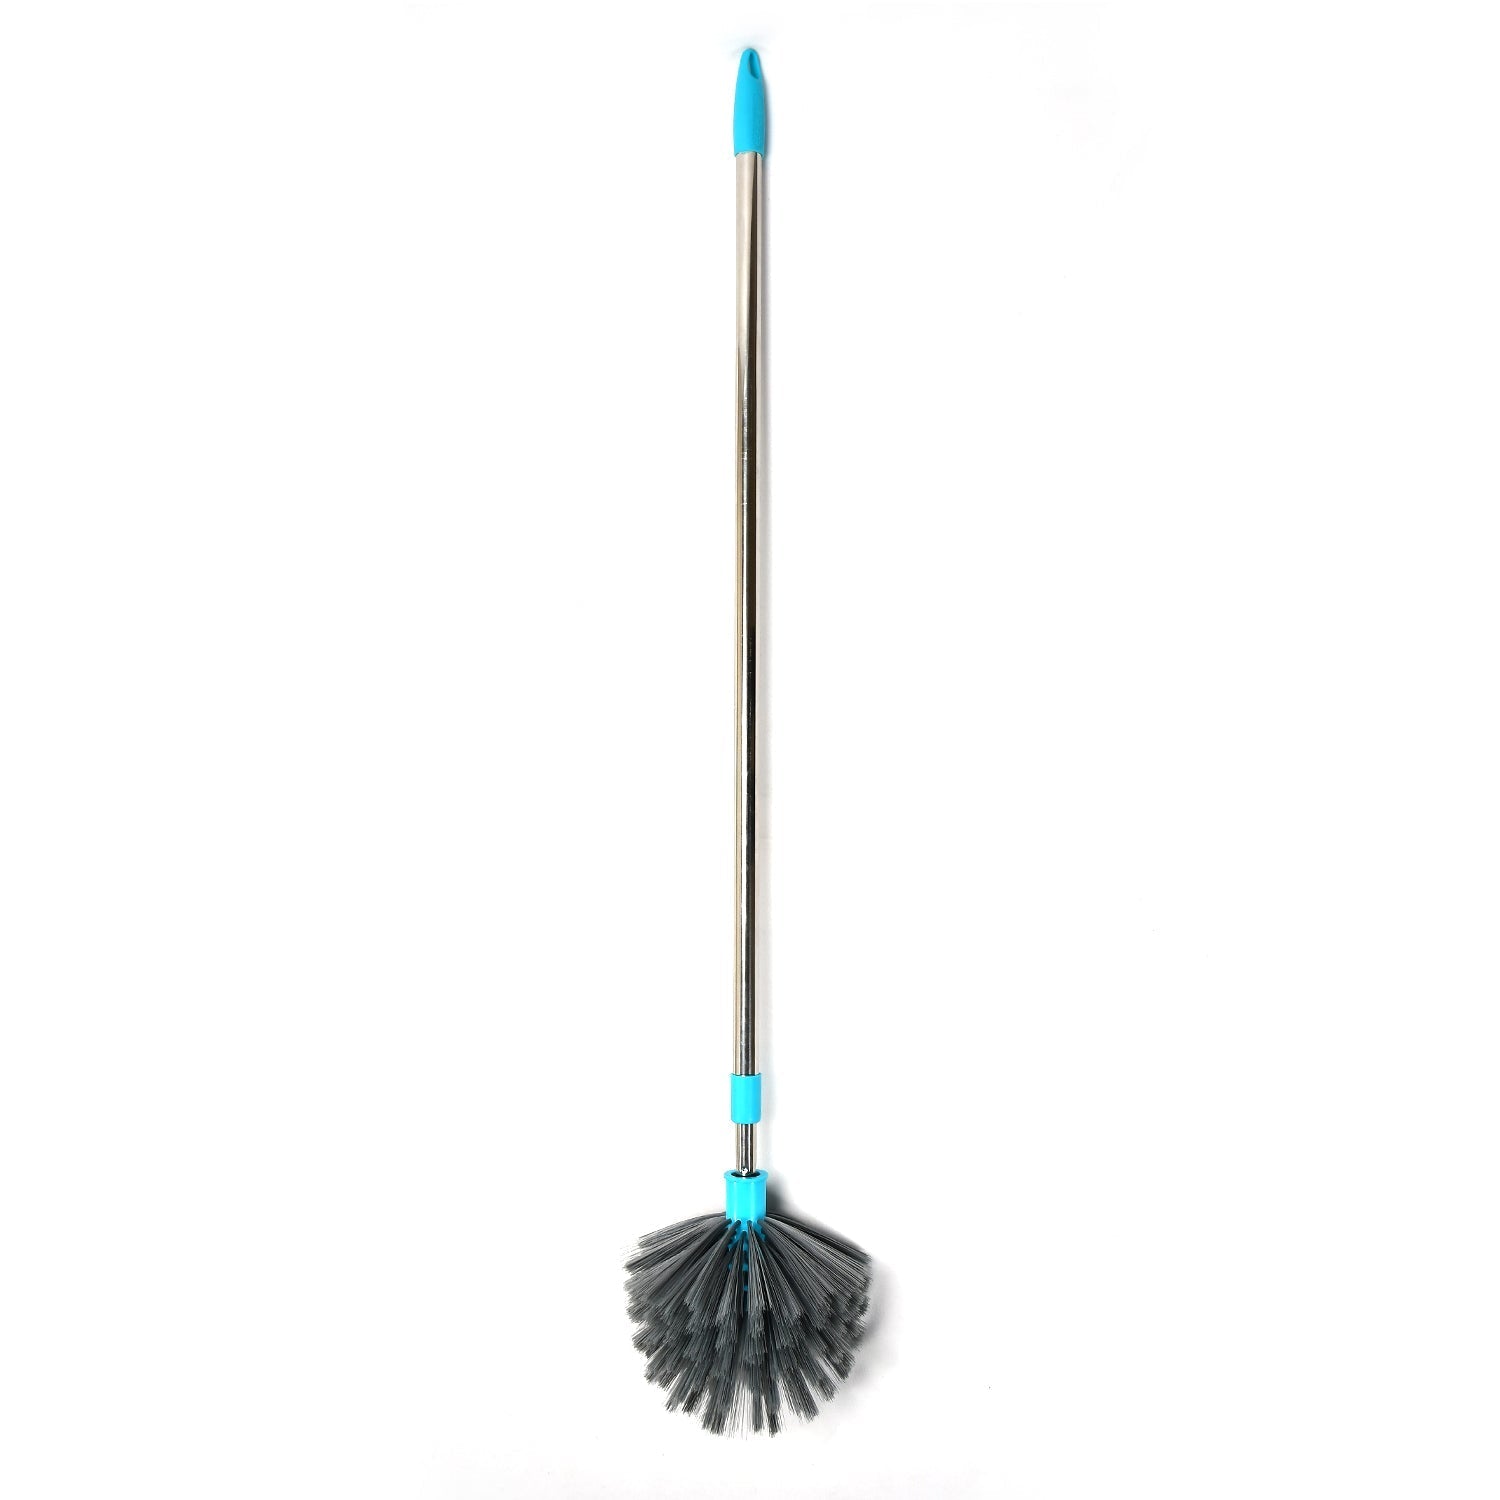 4021 Cobweb Brush With Stainless Steel Strong Long Extendable Handle for Dusting, Ceiling Cobweb Cleaning, Brush for Lights, Fans & Webs Cleaning for Home/Kitchen DeoDap